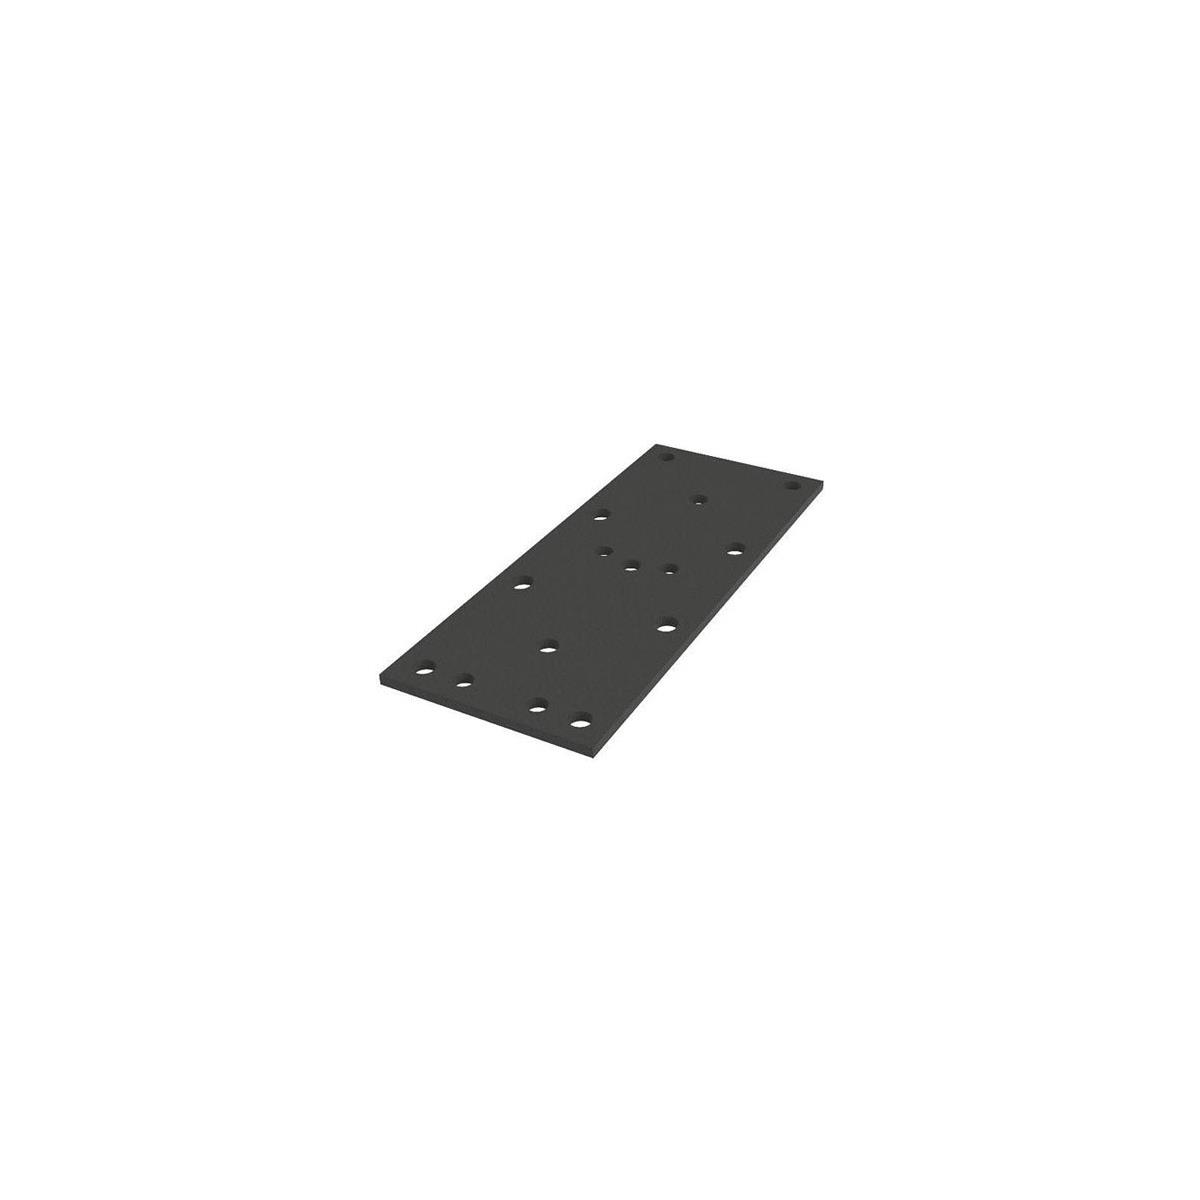 Image of ARRI S2.RBF02 Flat Plate for 2 Rails or Pipes